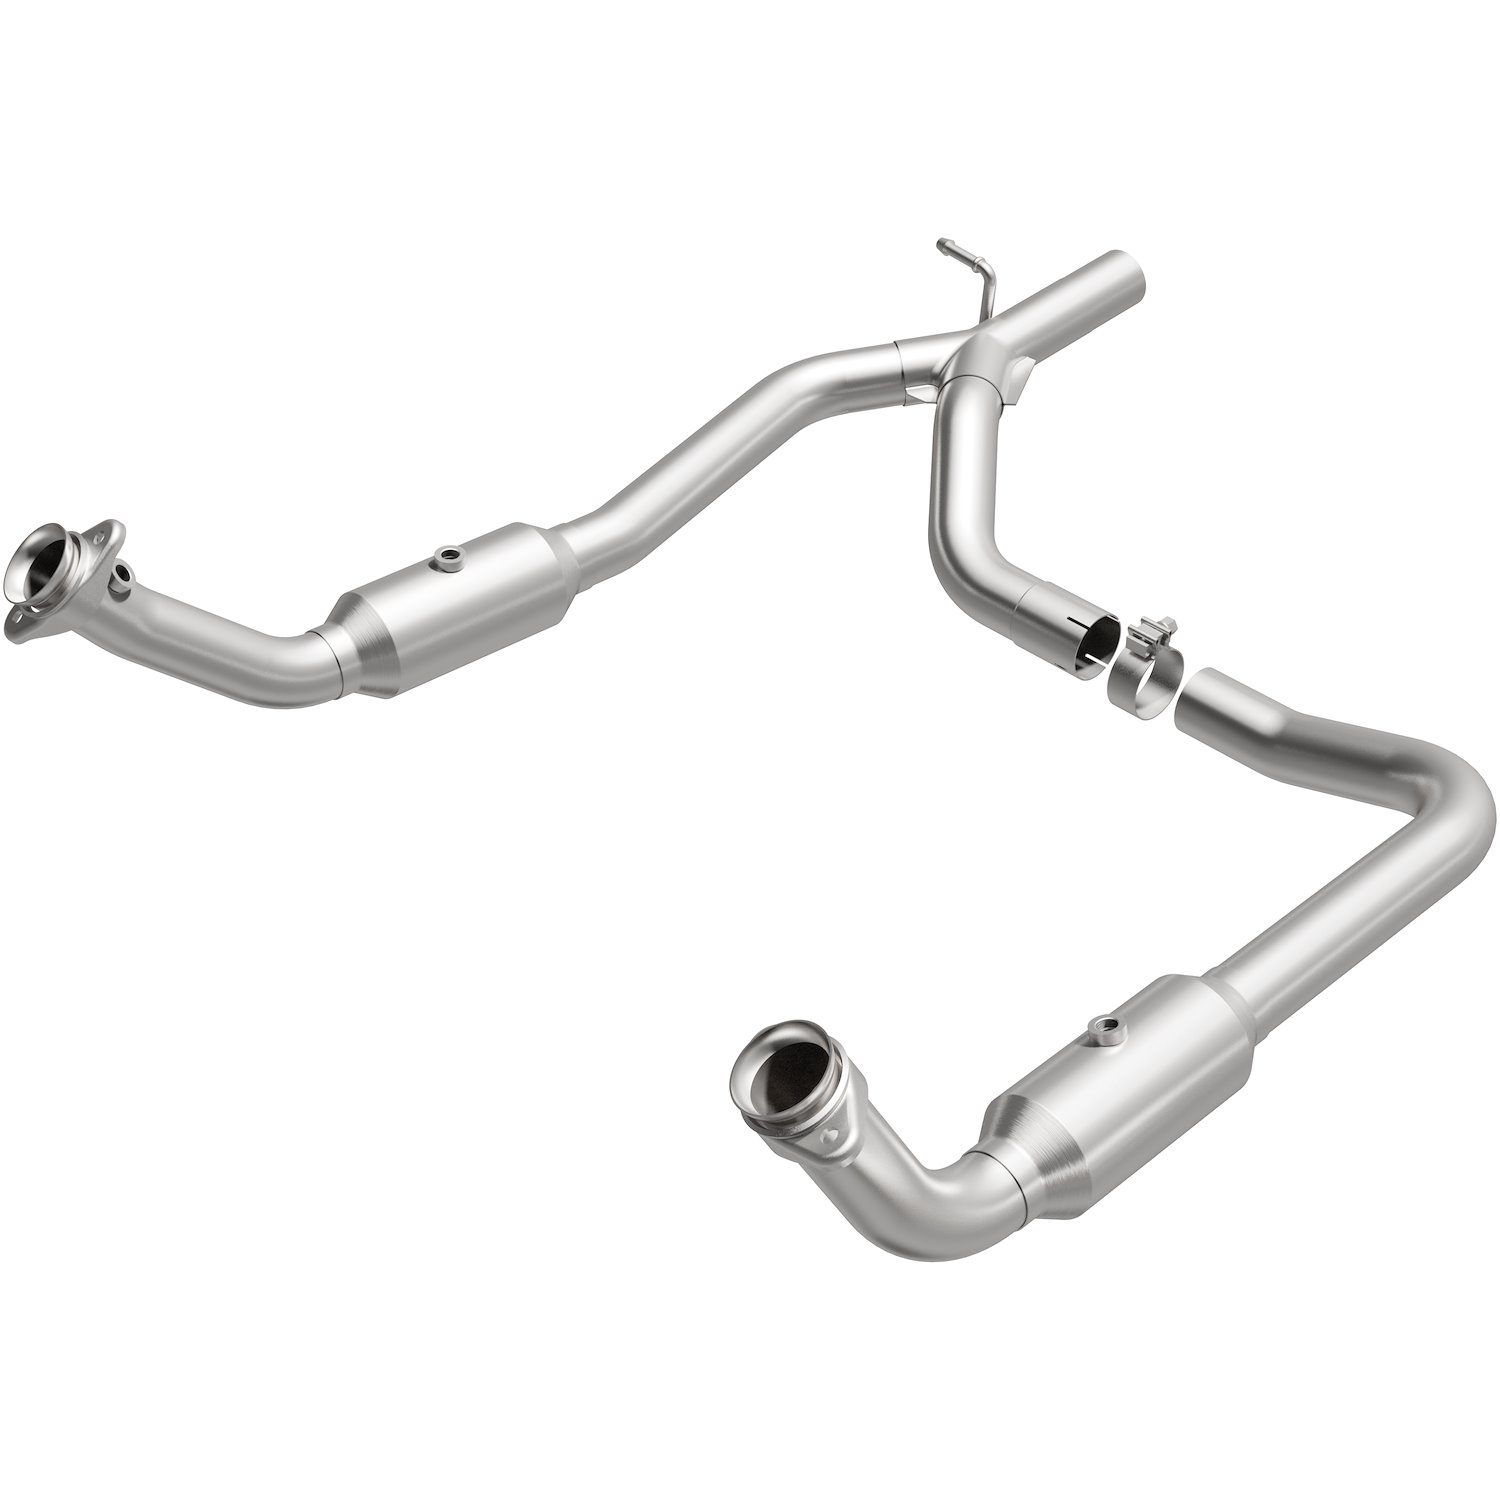 California Grade CARB Compliant Direct-Fit Catalytic Converter 5551153